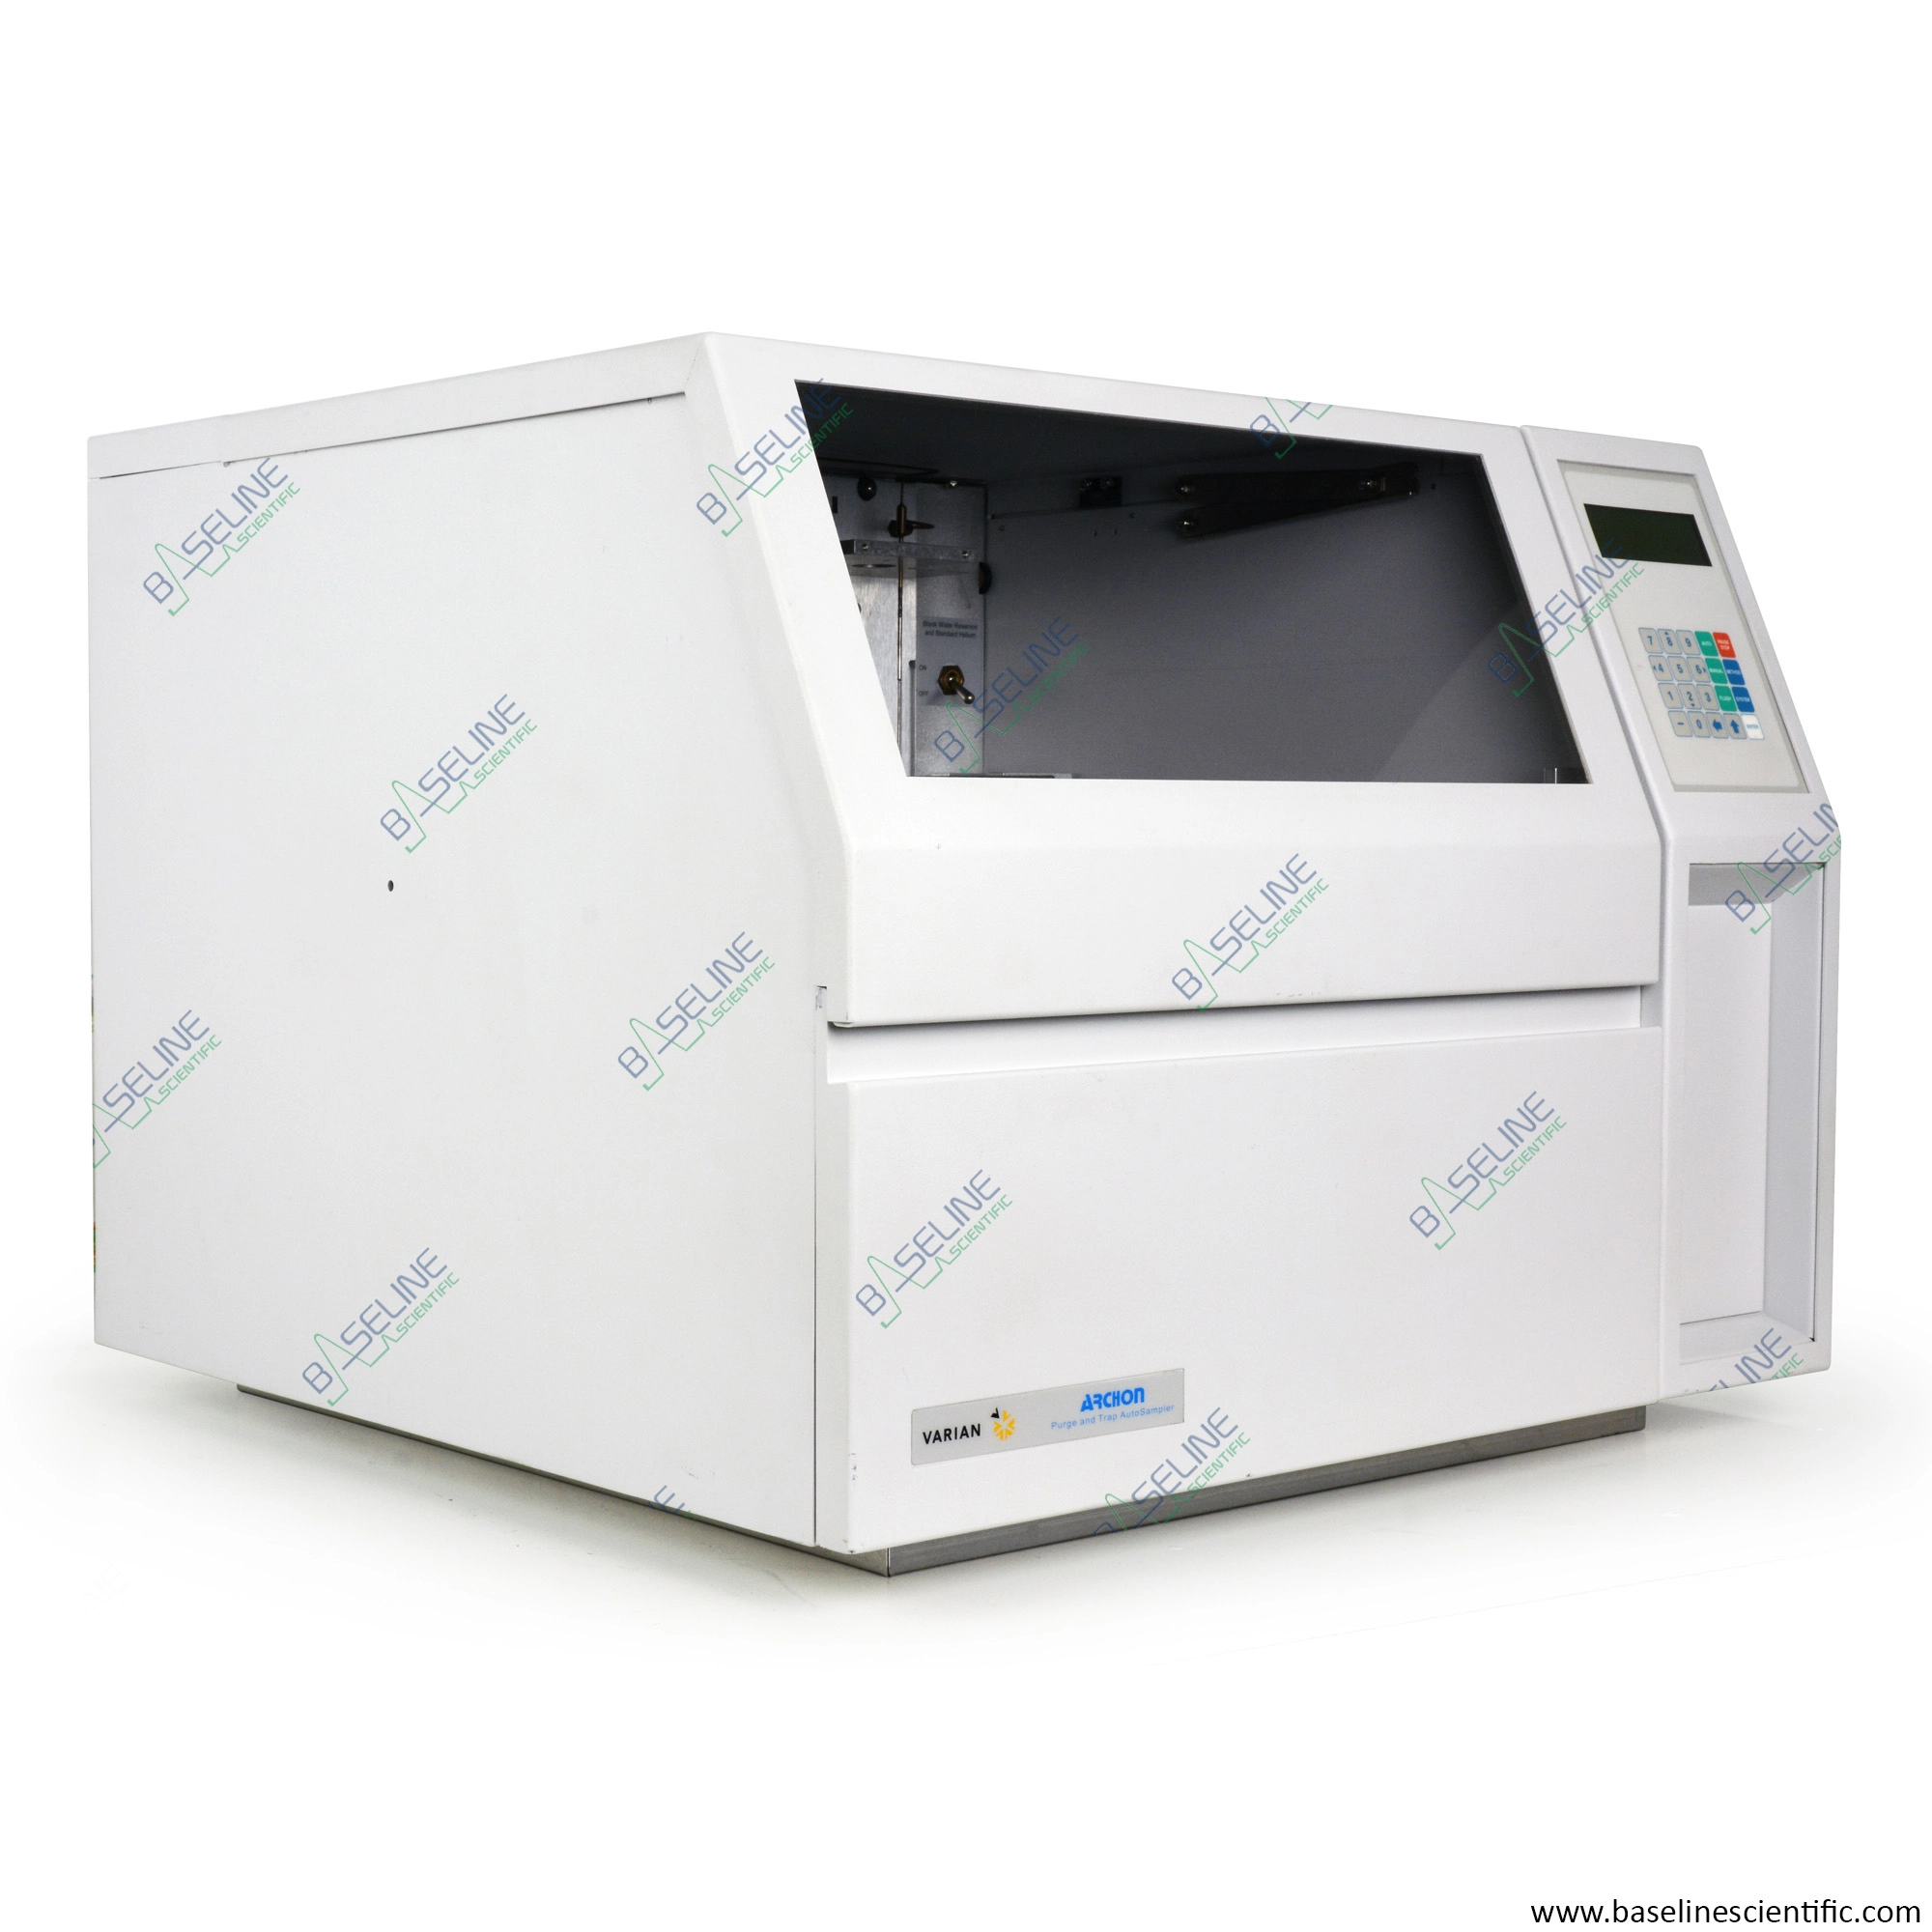 Refurbished Varian Archon Purge and Trap Autosampler